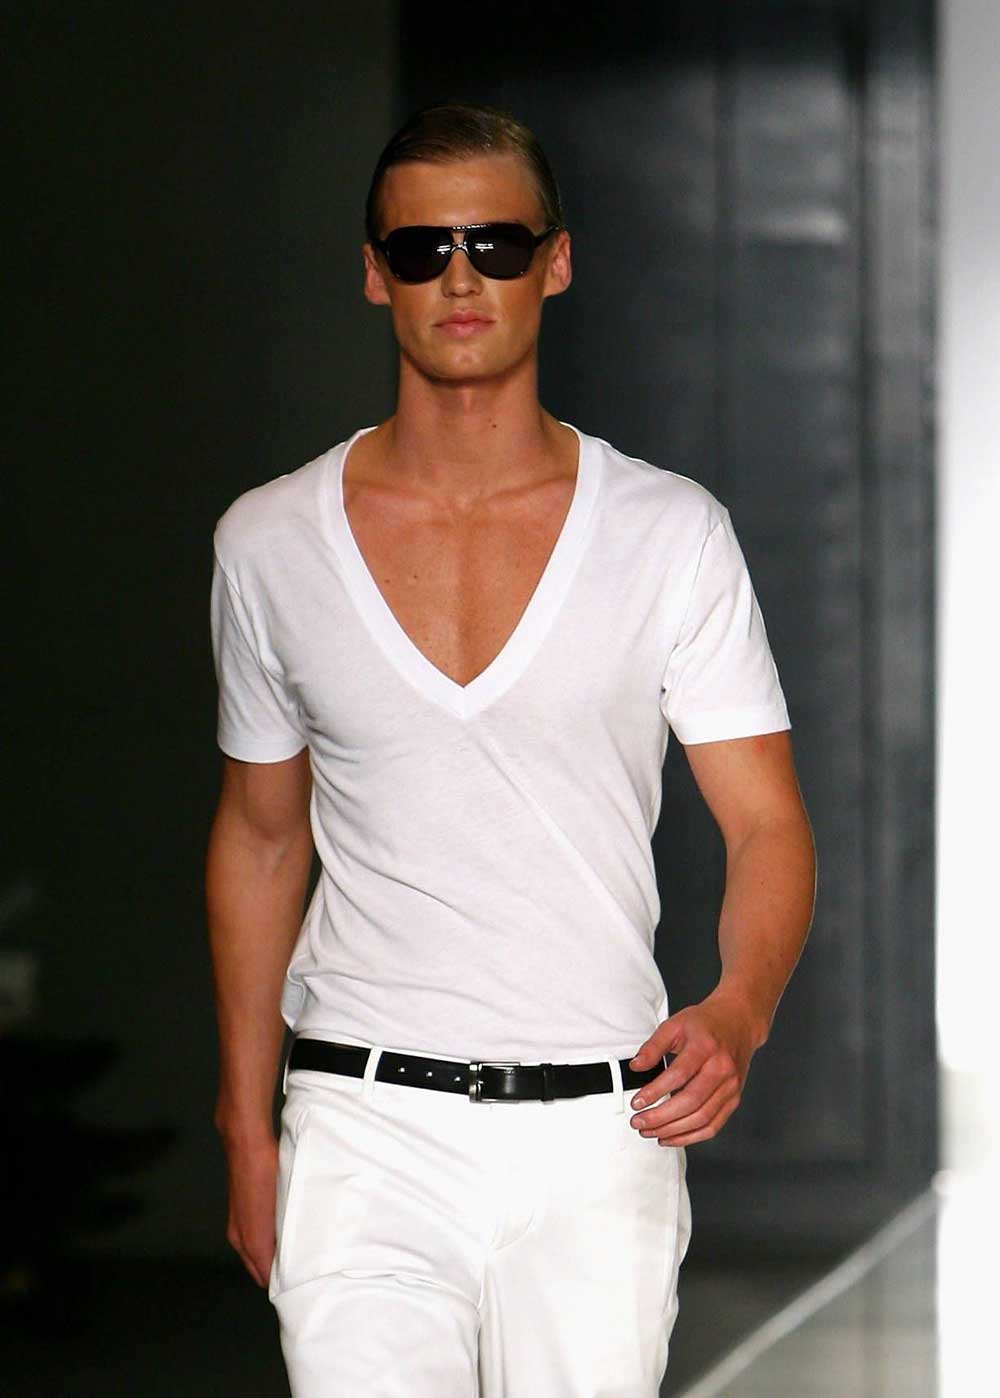 Deep V-neck t-shirts are a style that dates you to the 2000s